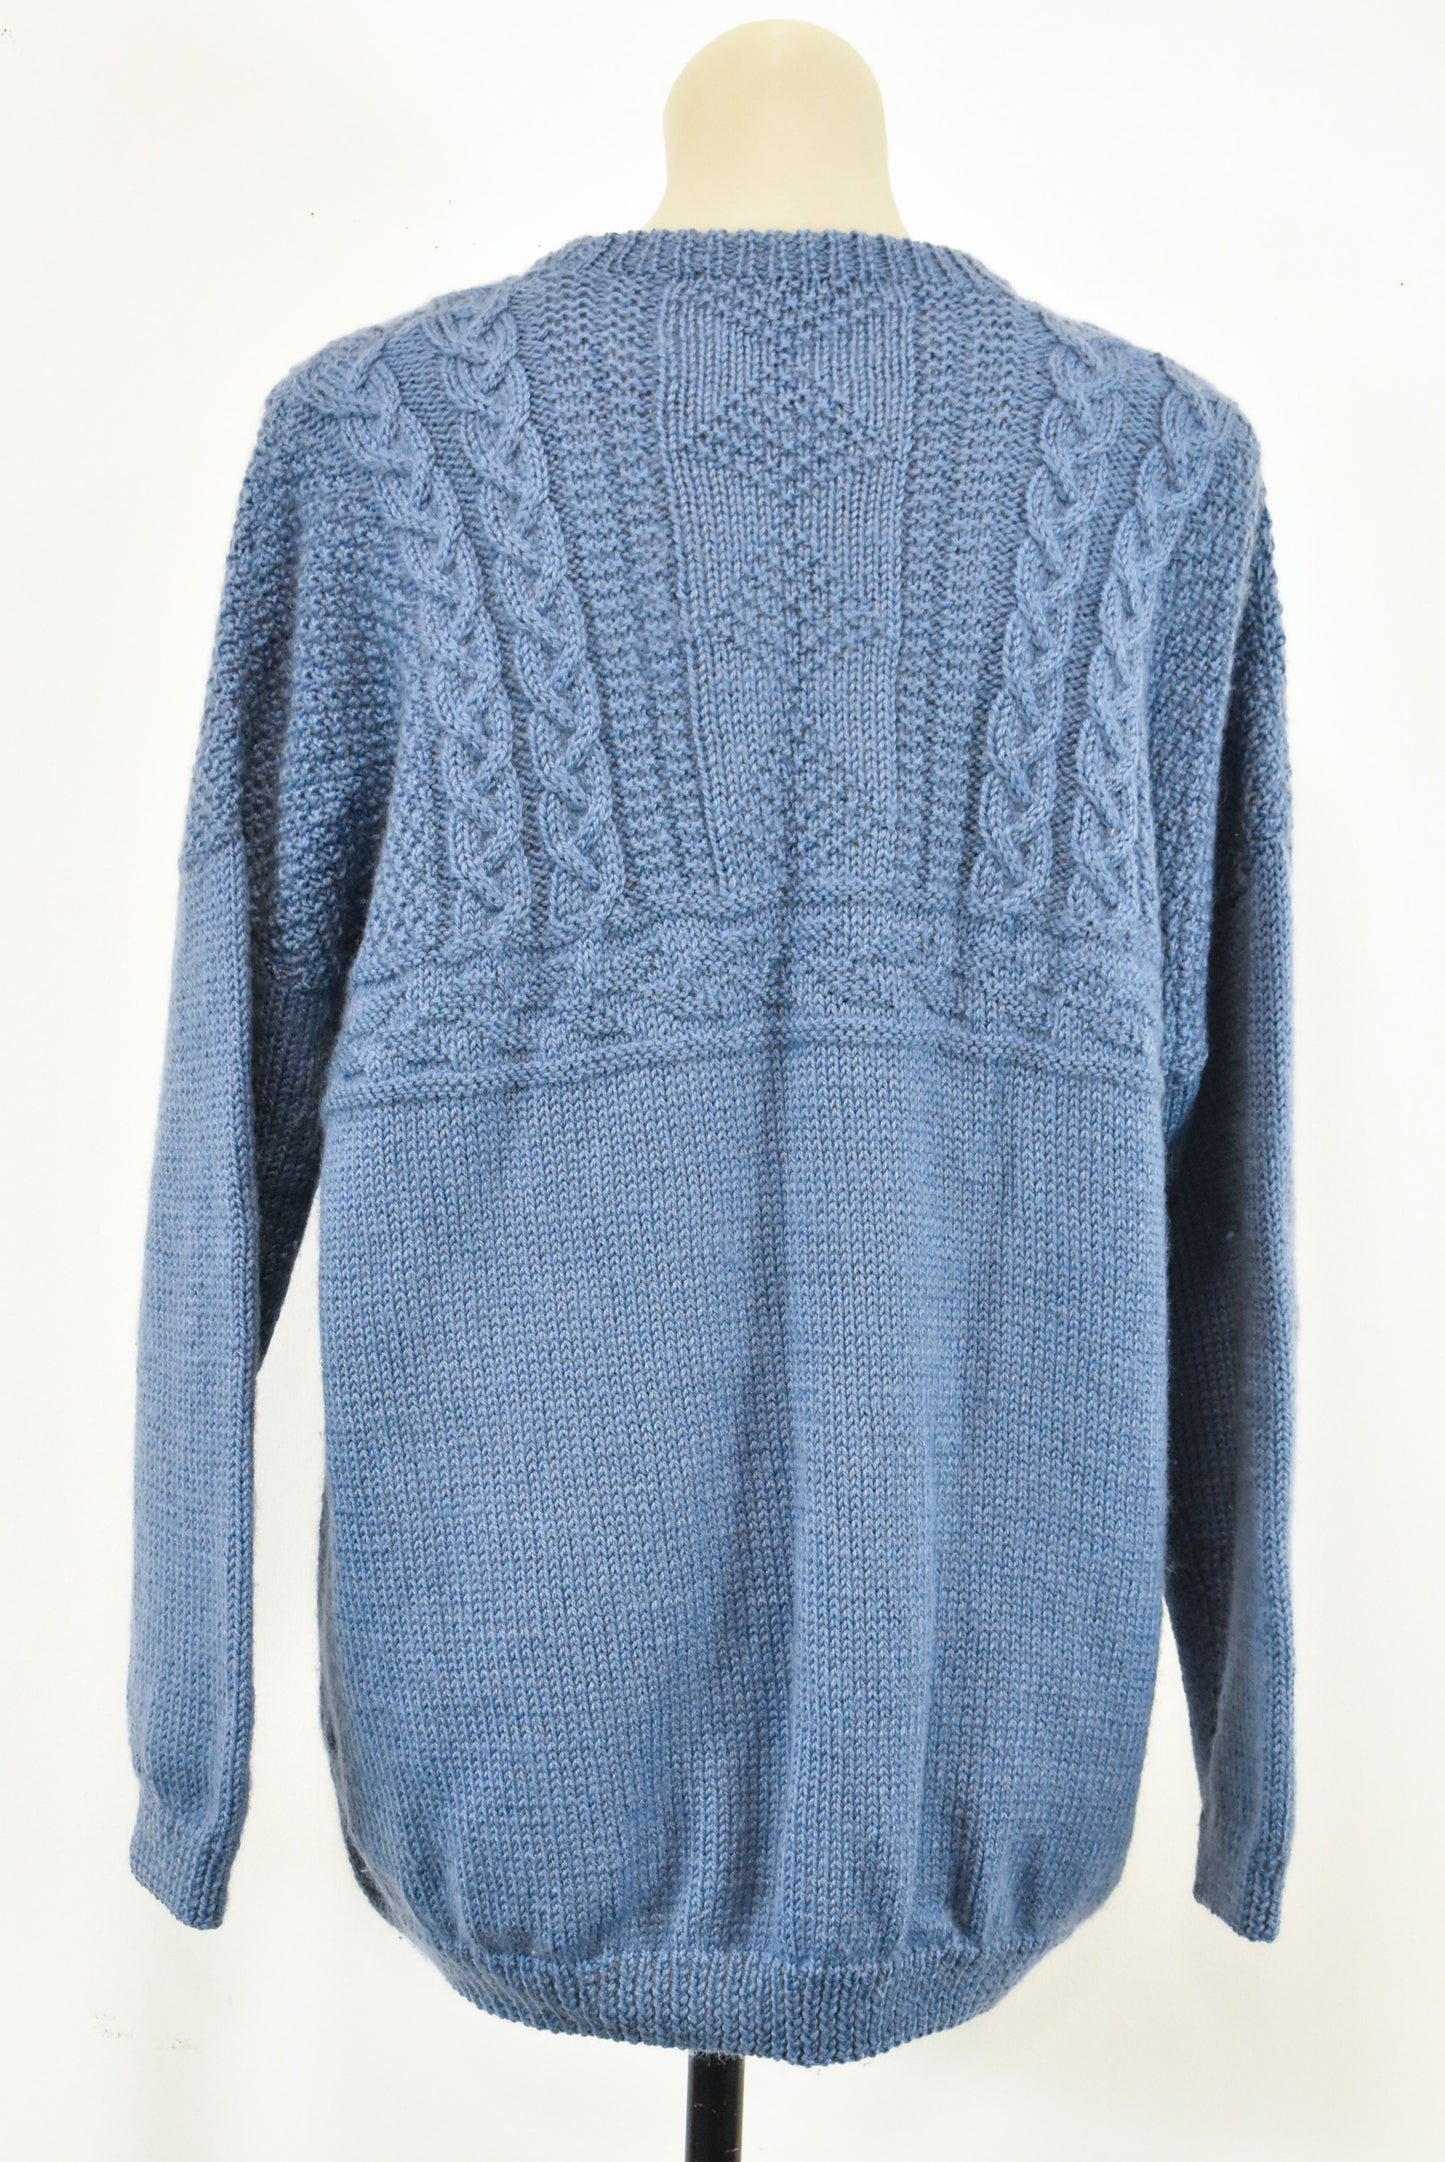 Blue cable hand knit sweater, L